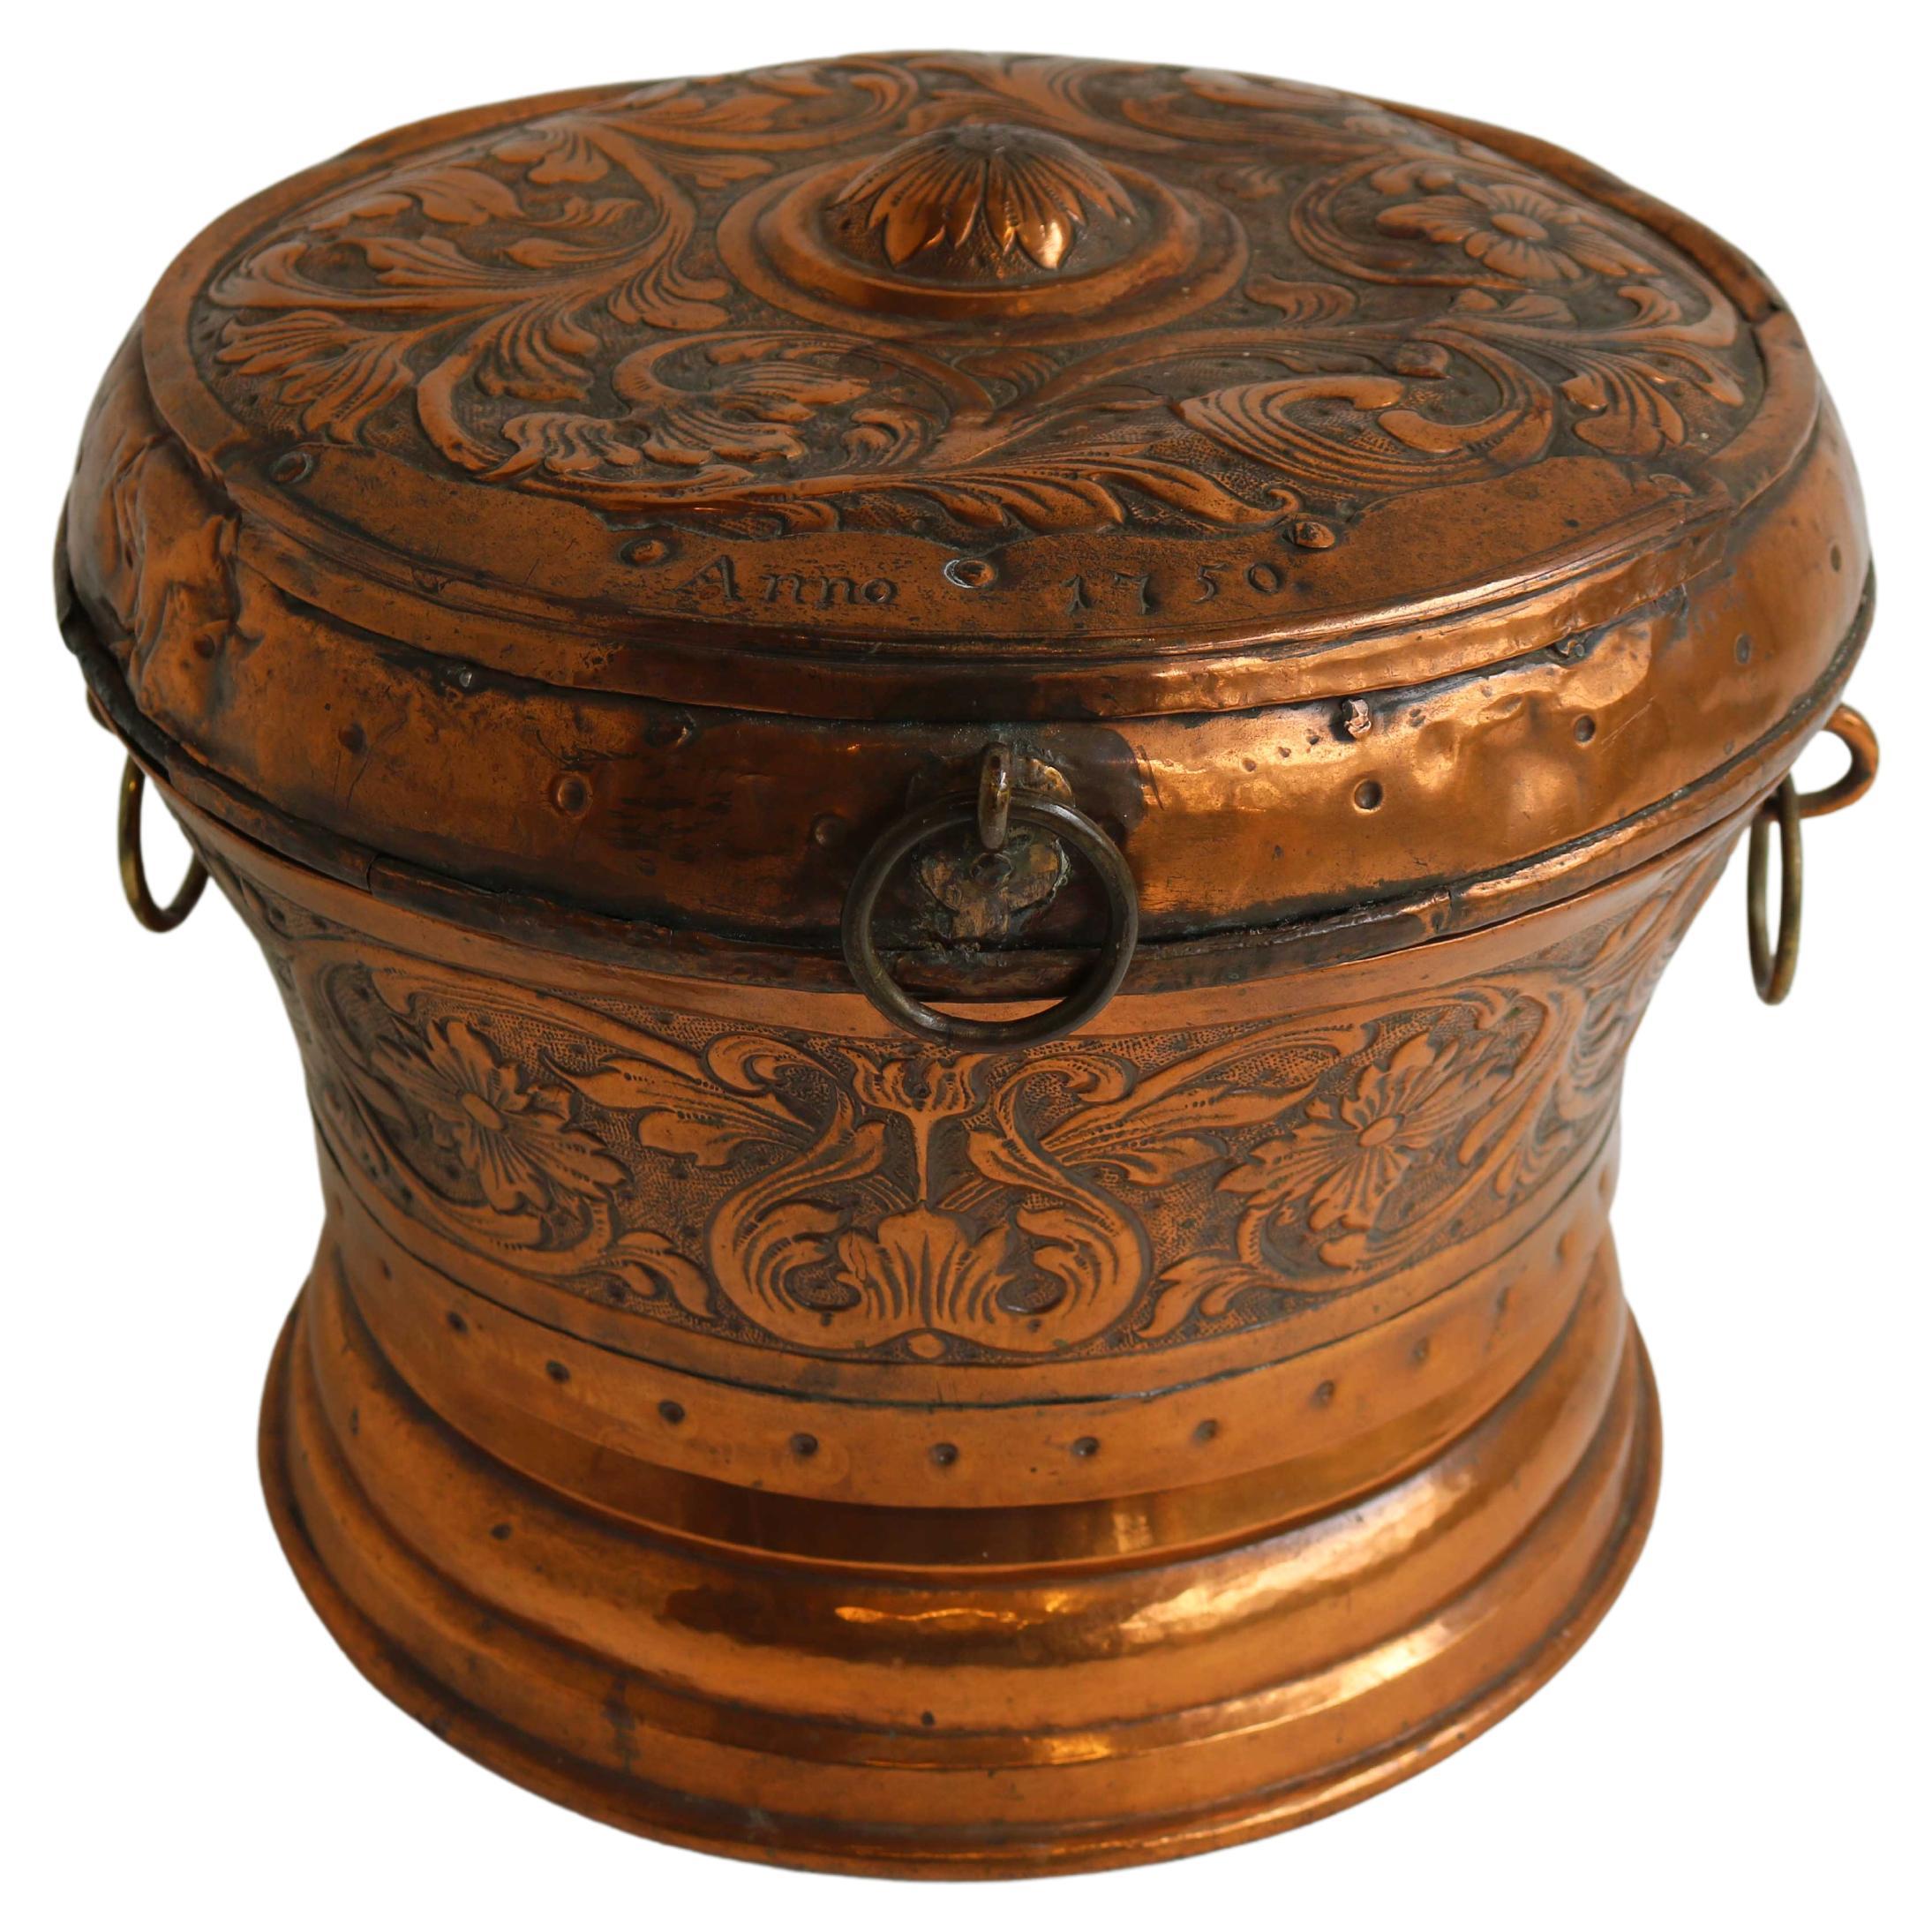 Antique copper bowl with lid, 18th century
Beautiful and richly decorated antique copper pot with lid with a very attractive decorated decor of seed beads in Rococo style. There are two original handles on either side. This box is dated Anno 1750